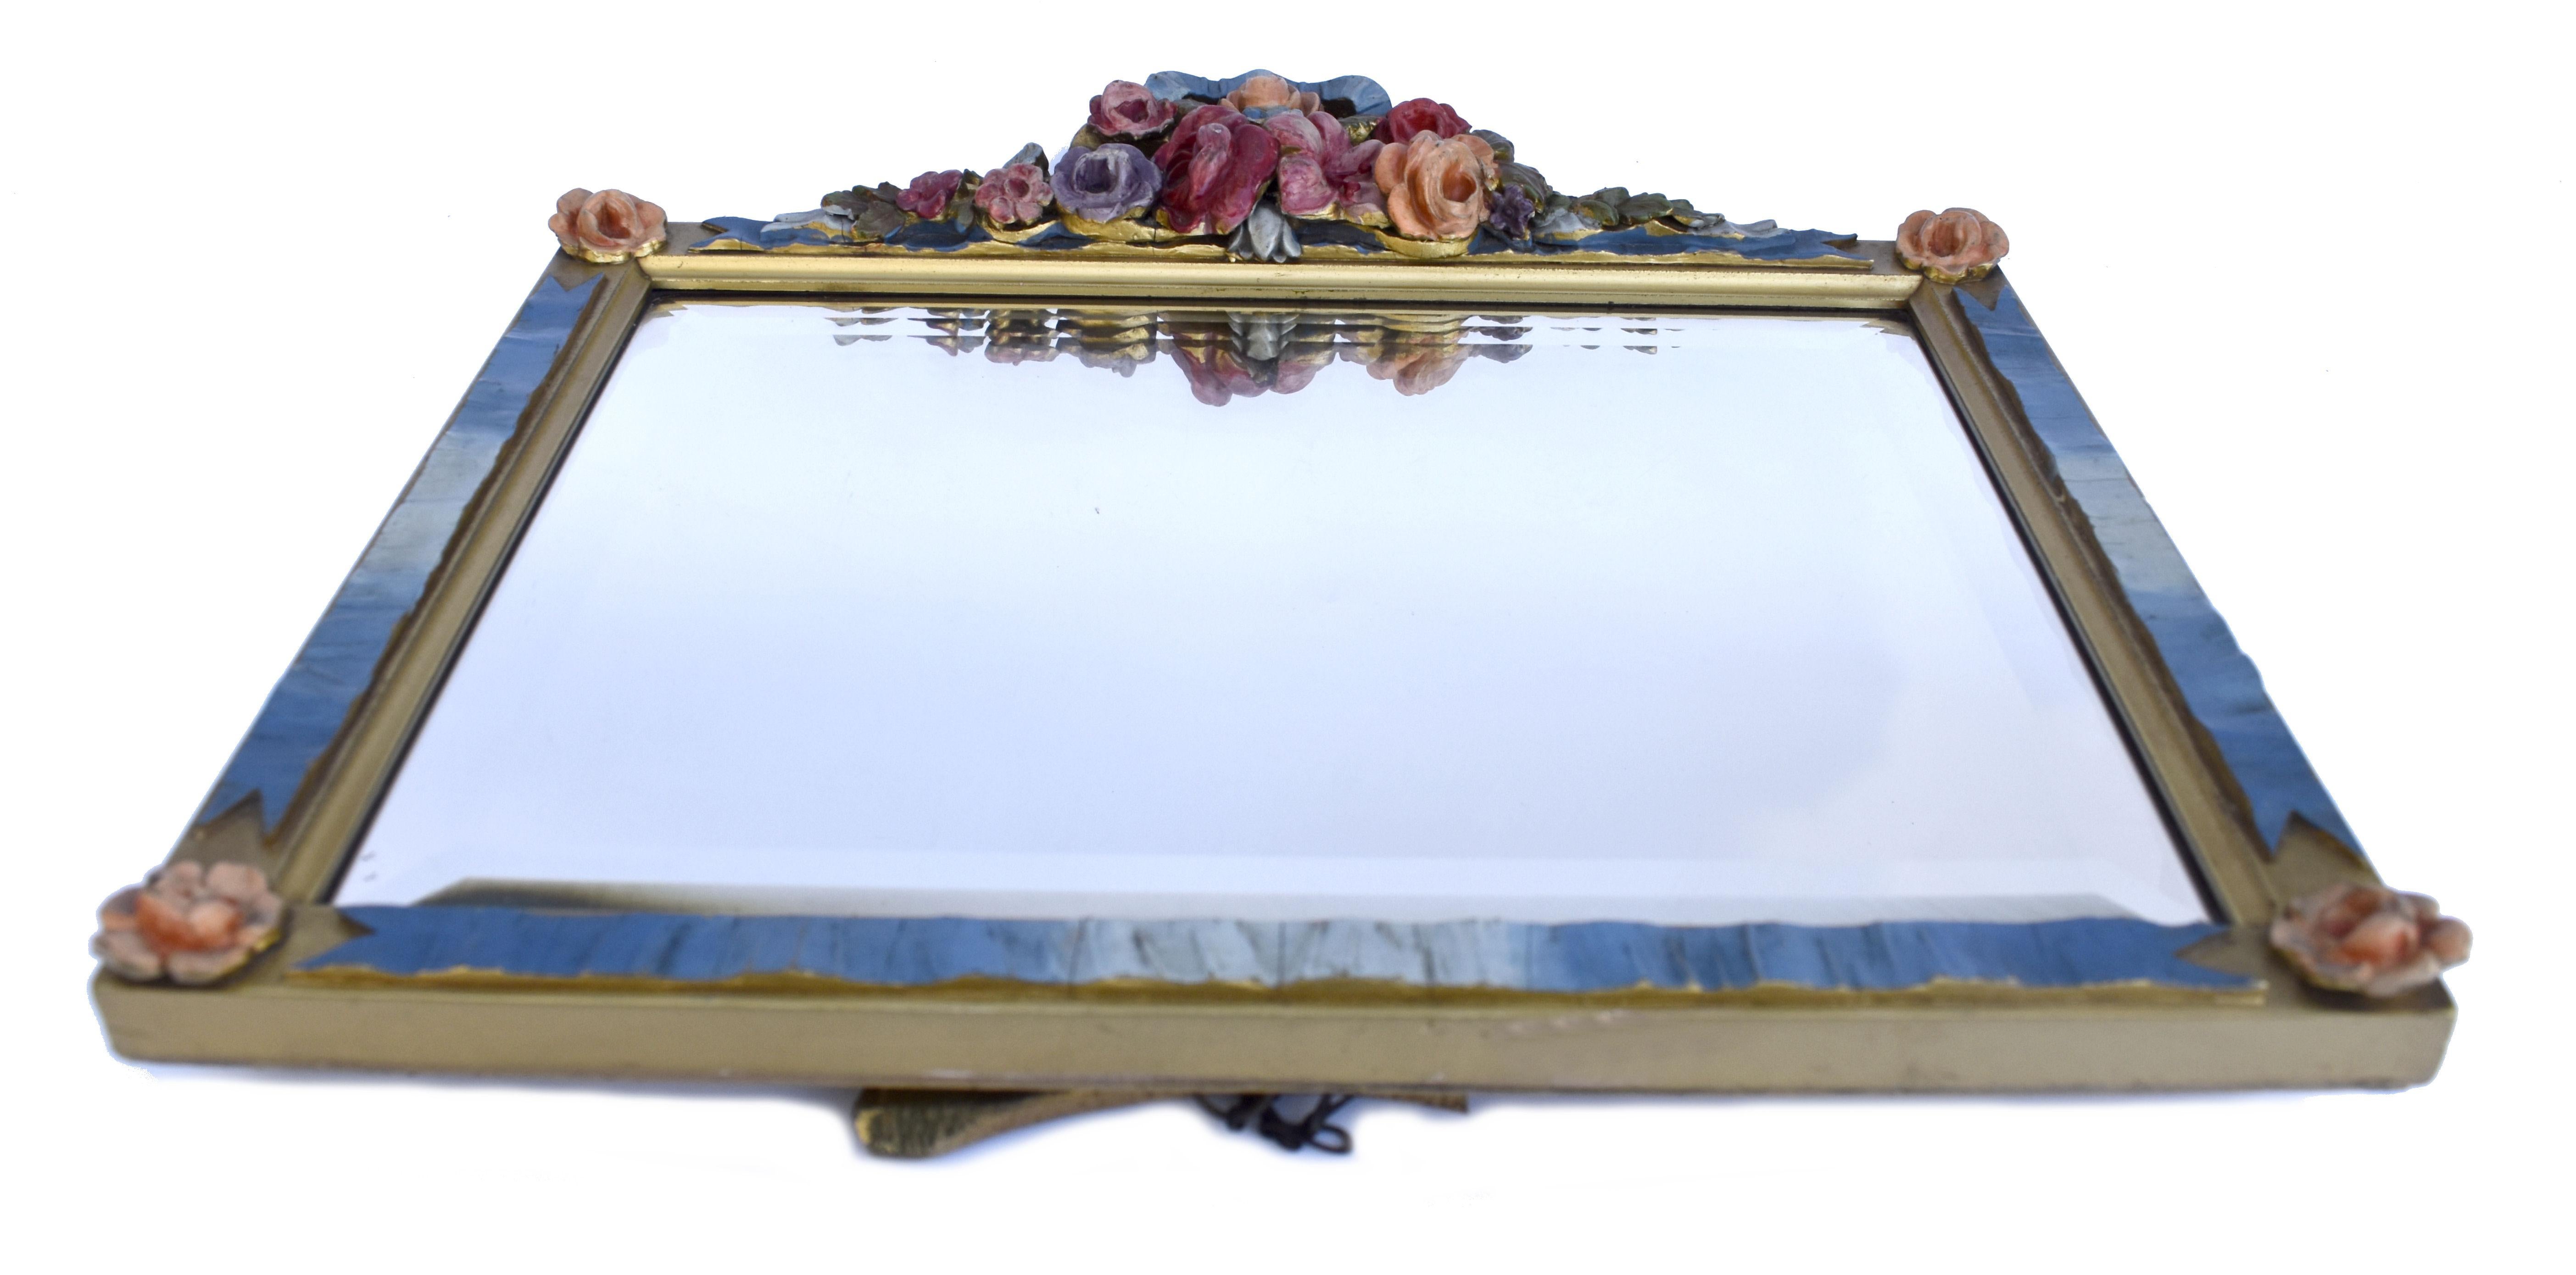 Rare original Art Deco Barbola Bevelled Mirror Floral. This is absolutely stunning beautiful piece, totally original, made in England and dates to the 1930's. Stunning pastel colours, beautifully detailed and hand painted, the colours still vibrant.